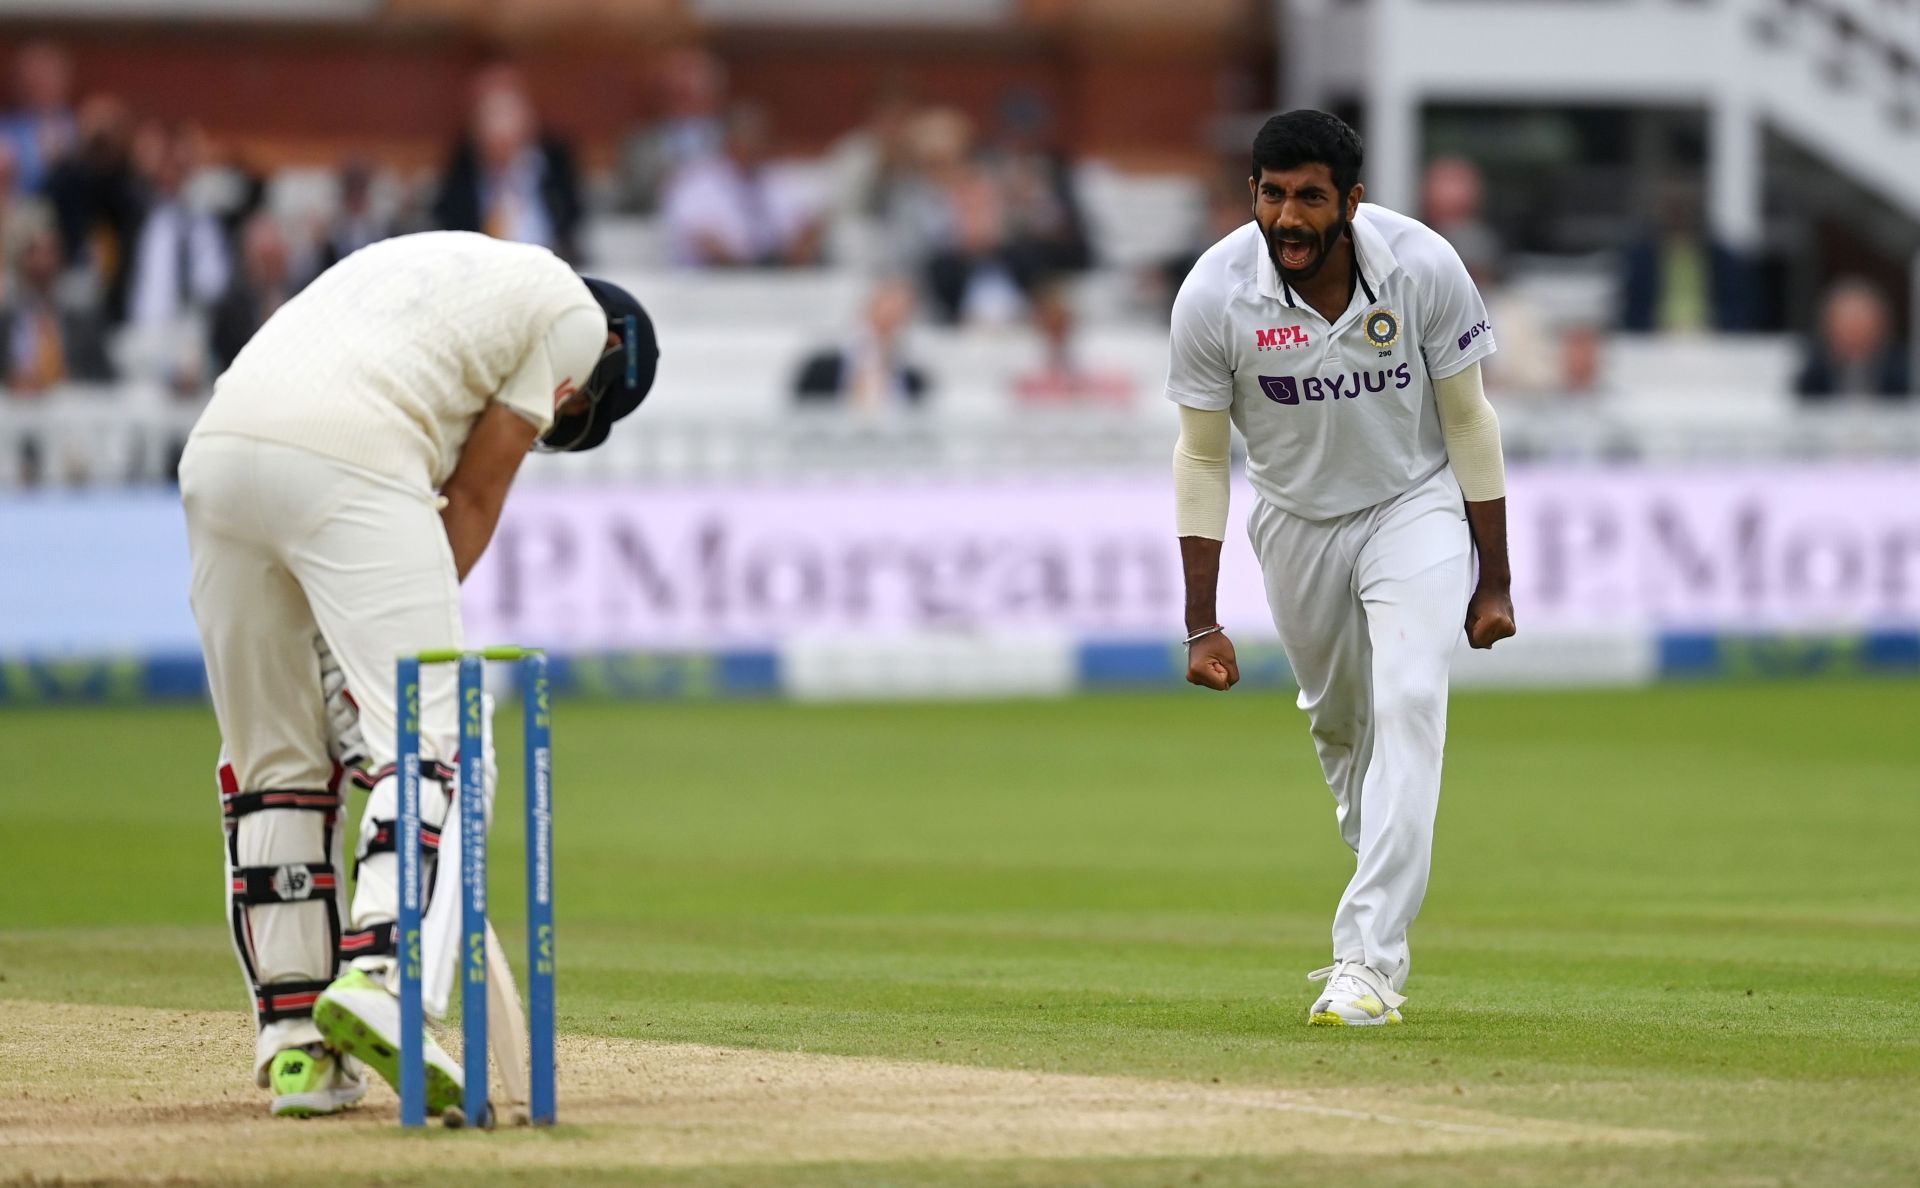 Jasprit Bumrah will captain Team India if Rohit Sharma is ruled out of the Edgbaston Test